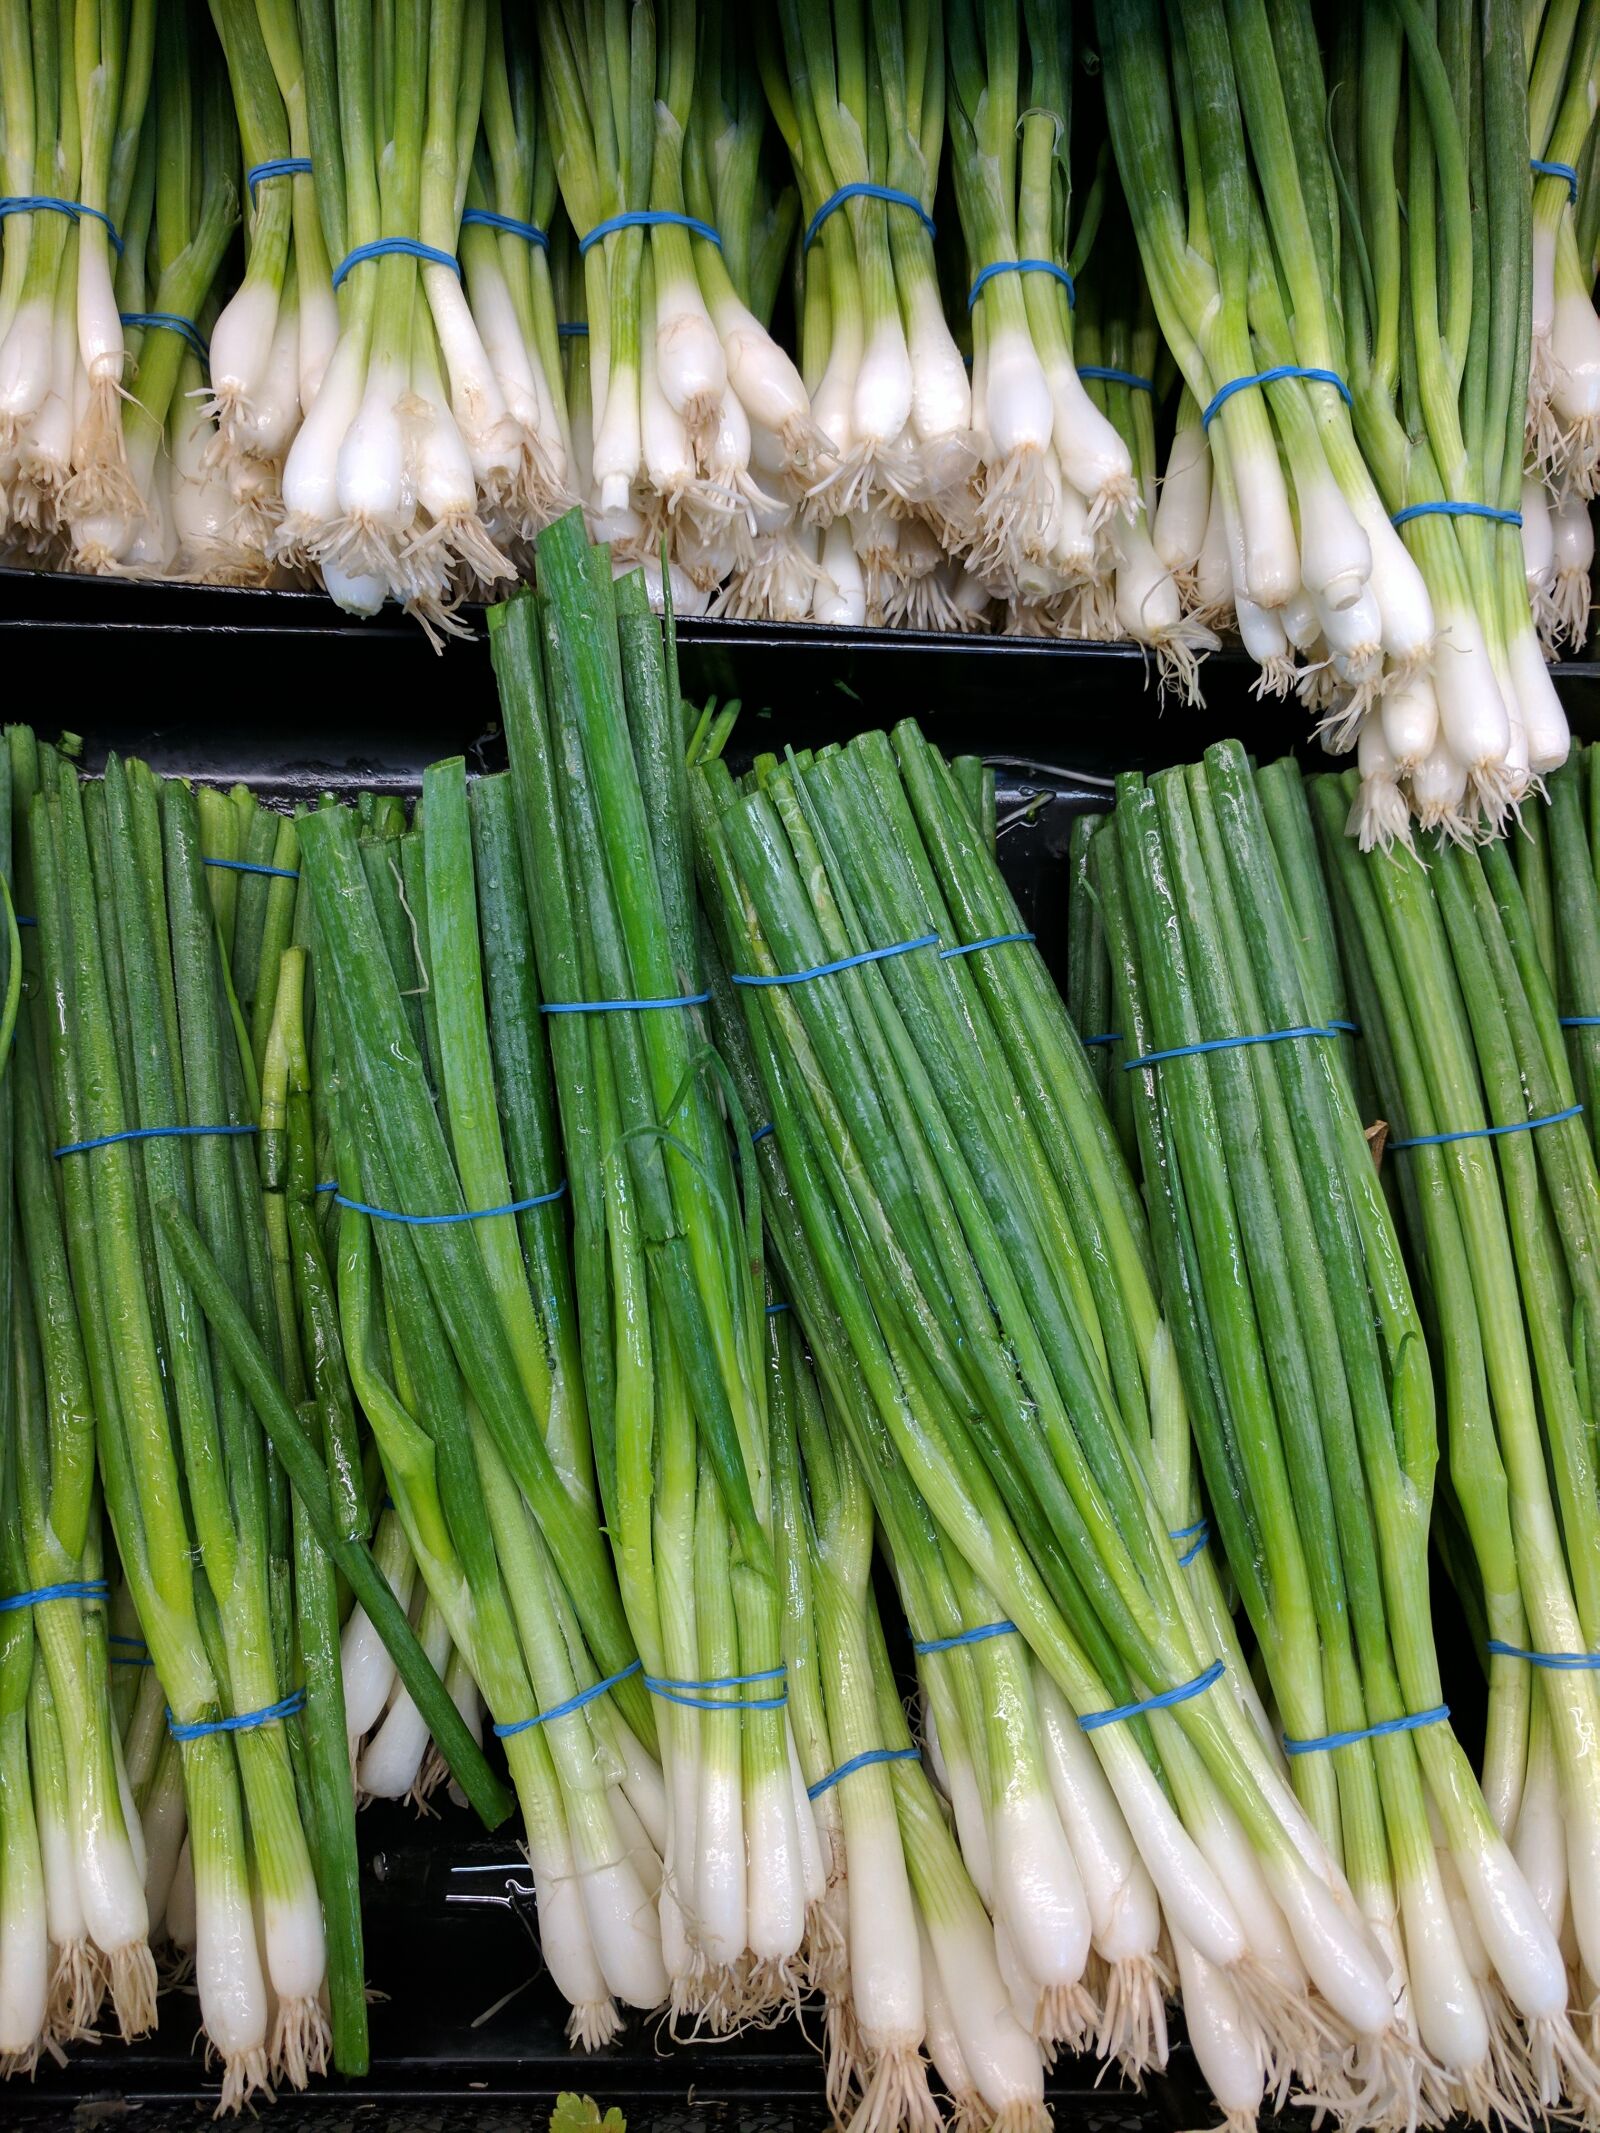 Google Pixel XL sample photo. Green onions, grocery store photography